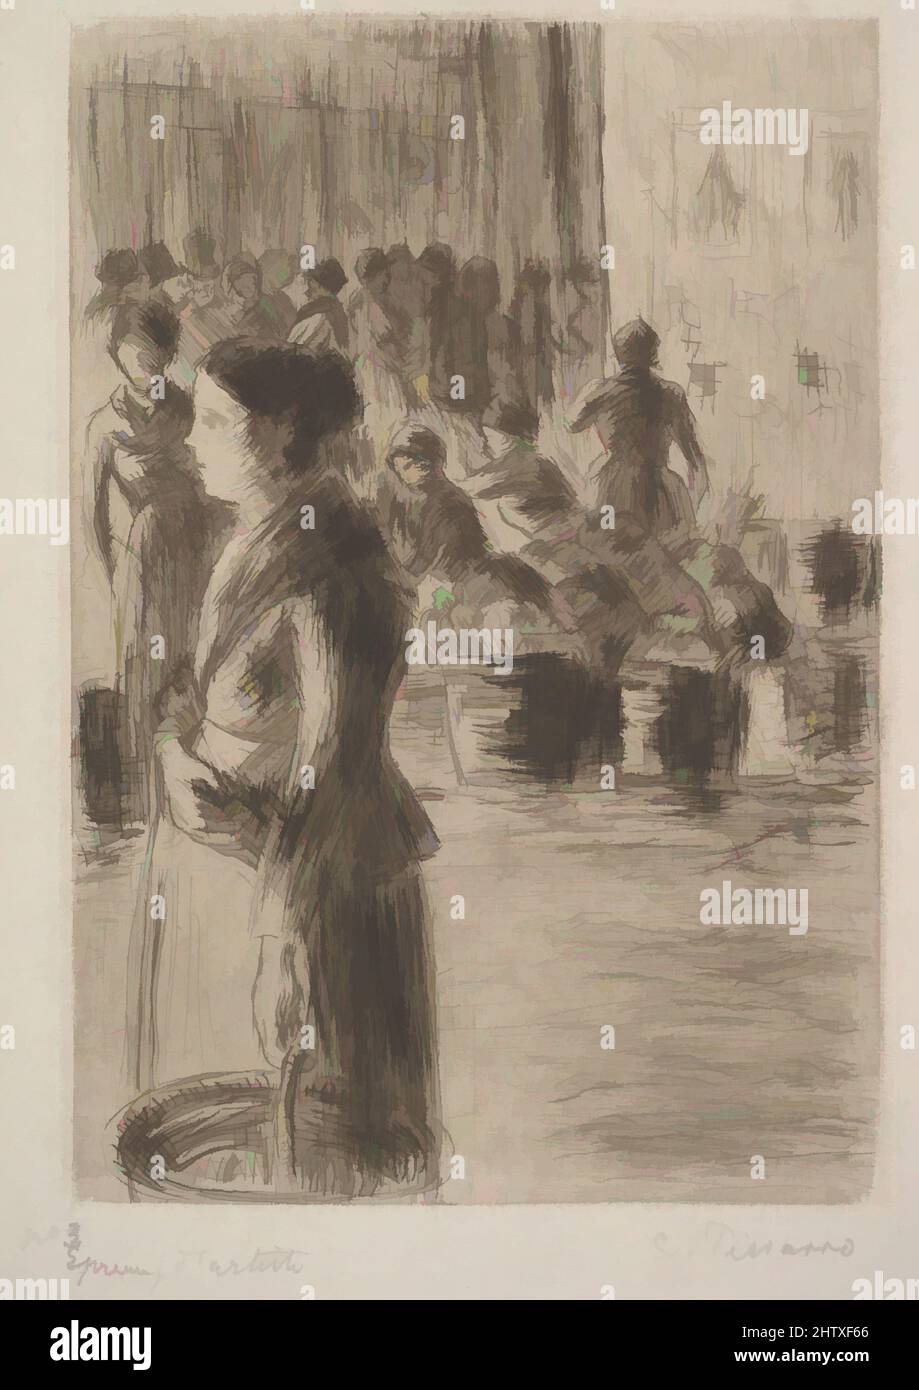 Art inspired by The Maid at the Market, 1888, Etching and drypoint on china paper; second state of four, sheet: 13 7/8 x 9 3/16 in. (35.3 x 23.3 cm), Prints, Camille Pissarro (French, Charlotte Amalie, Saint Thomas 1830–1903 Paris, Classic works modernized by Artotop with a splash of modernity. Shapes, color and value, eye-catching visual impact on art. Emotions through freedom of artworks in a contemporary way. A timeless message pursuing a wildly creative new direction. Artists turning to the digital medium and creating the Artotop NFT Stock Photo